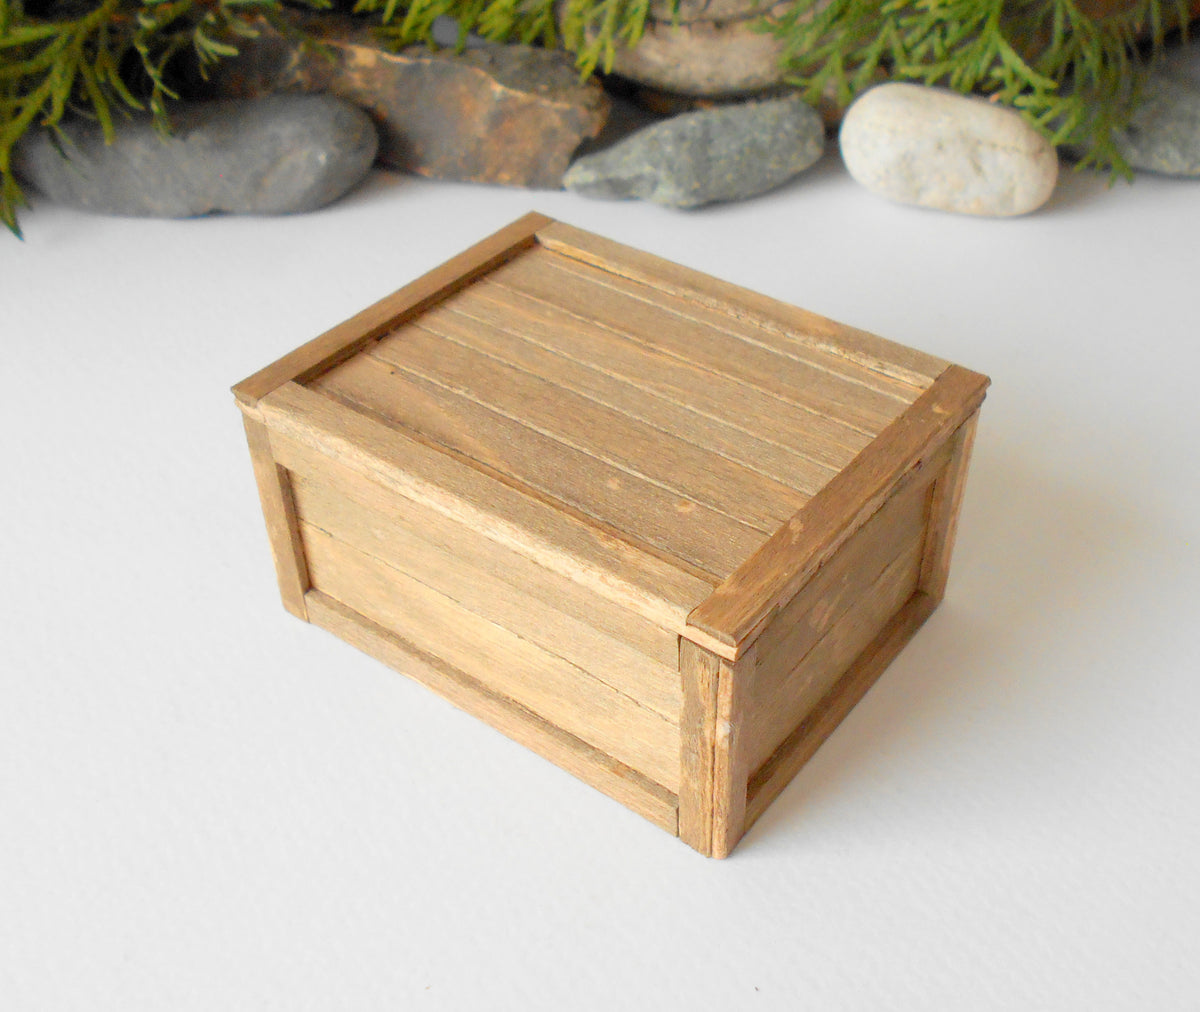 This is a miniature transporting box coffer that is approximately 1/12 in scale. The box coffer has 3 wooden boards in height and four boards in width on each side.&lt;br data-mce-fragment=&quot;1&quot;&gt;This is a listing to purchase one such miniature box like the one you see from the pictures. I have stained the box in light brown with an Italian eco-friendly mordant.&amp;nbsp;